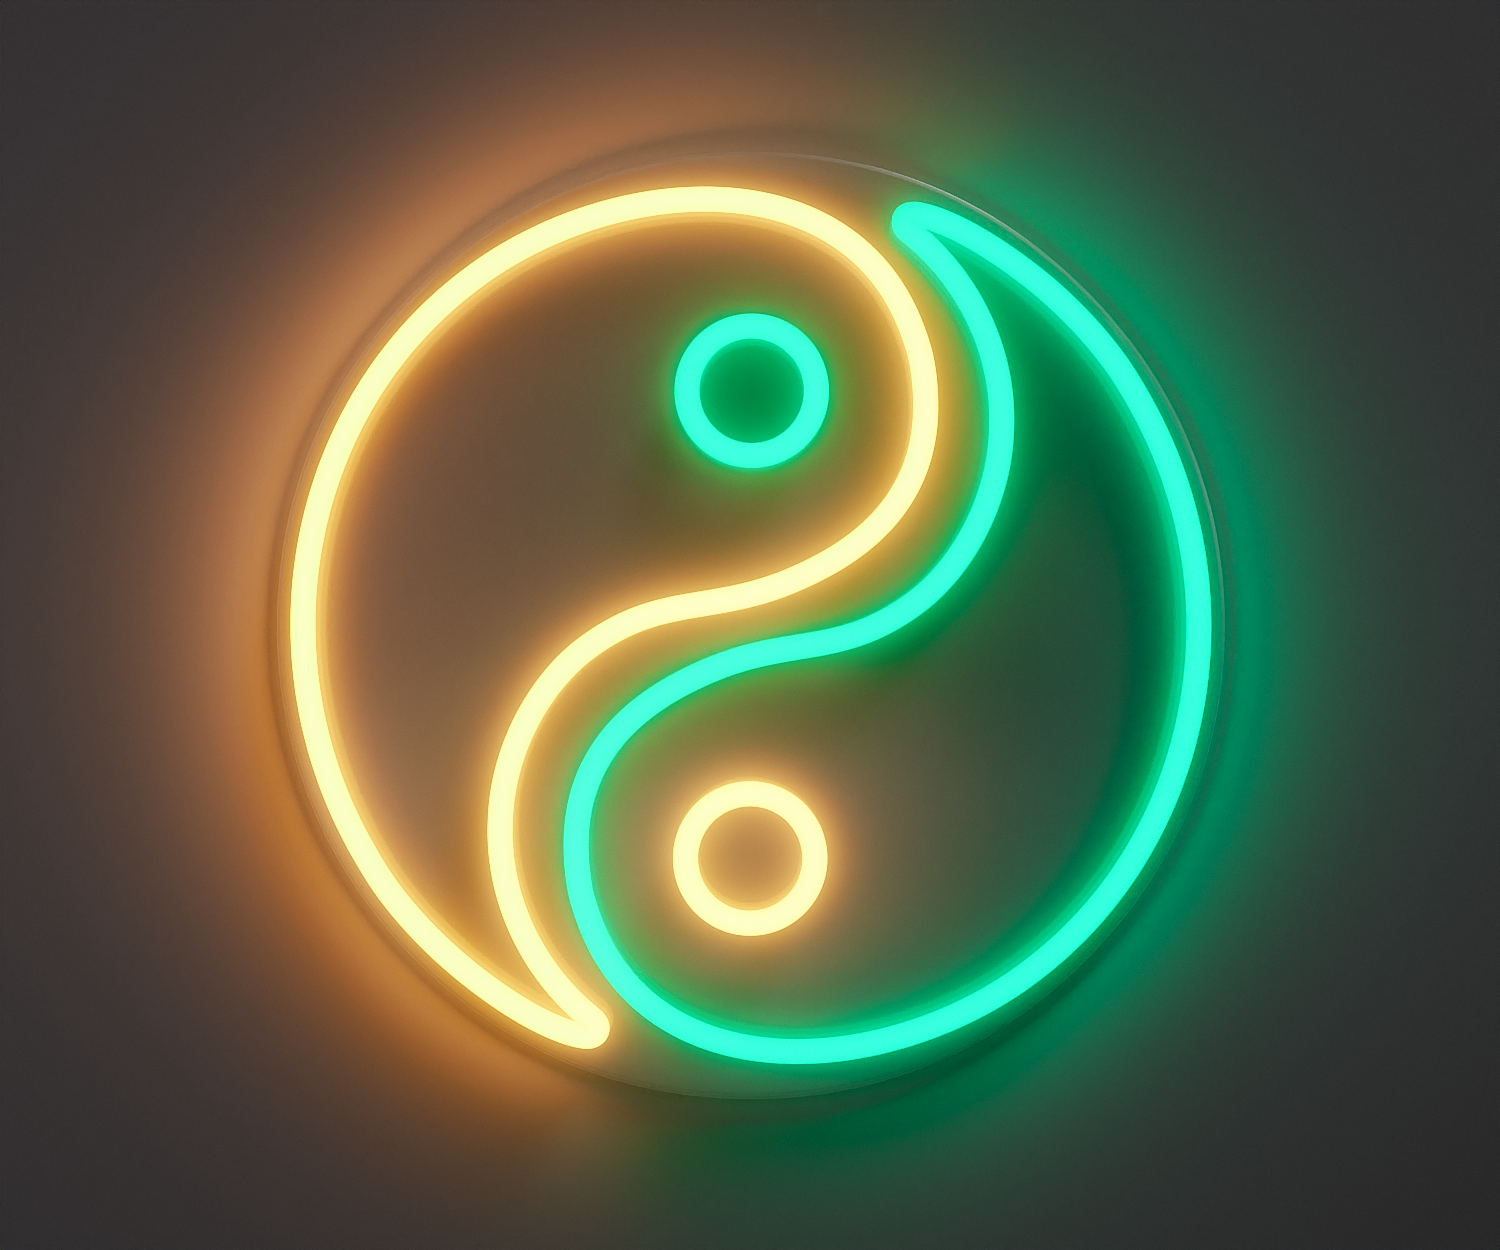 Yin Yang neon sign, warm white and turquoise